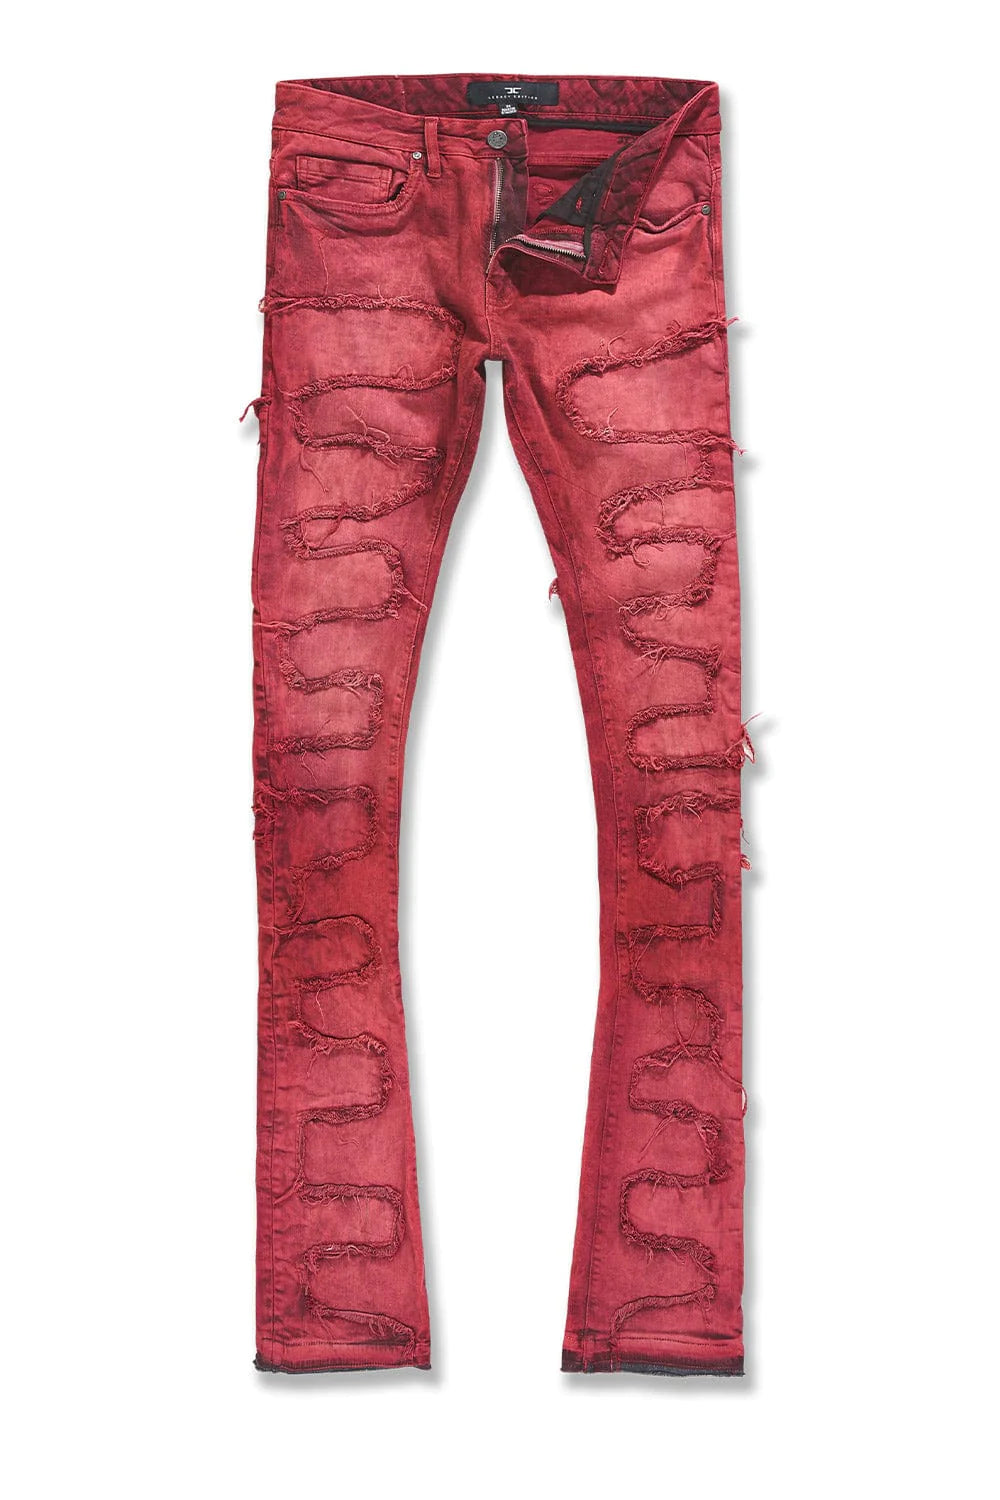 Martin Stacked - Oasis Denim Jeans - Red